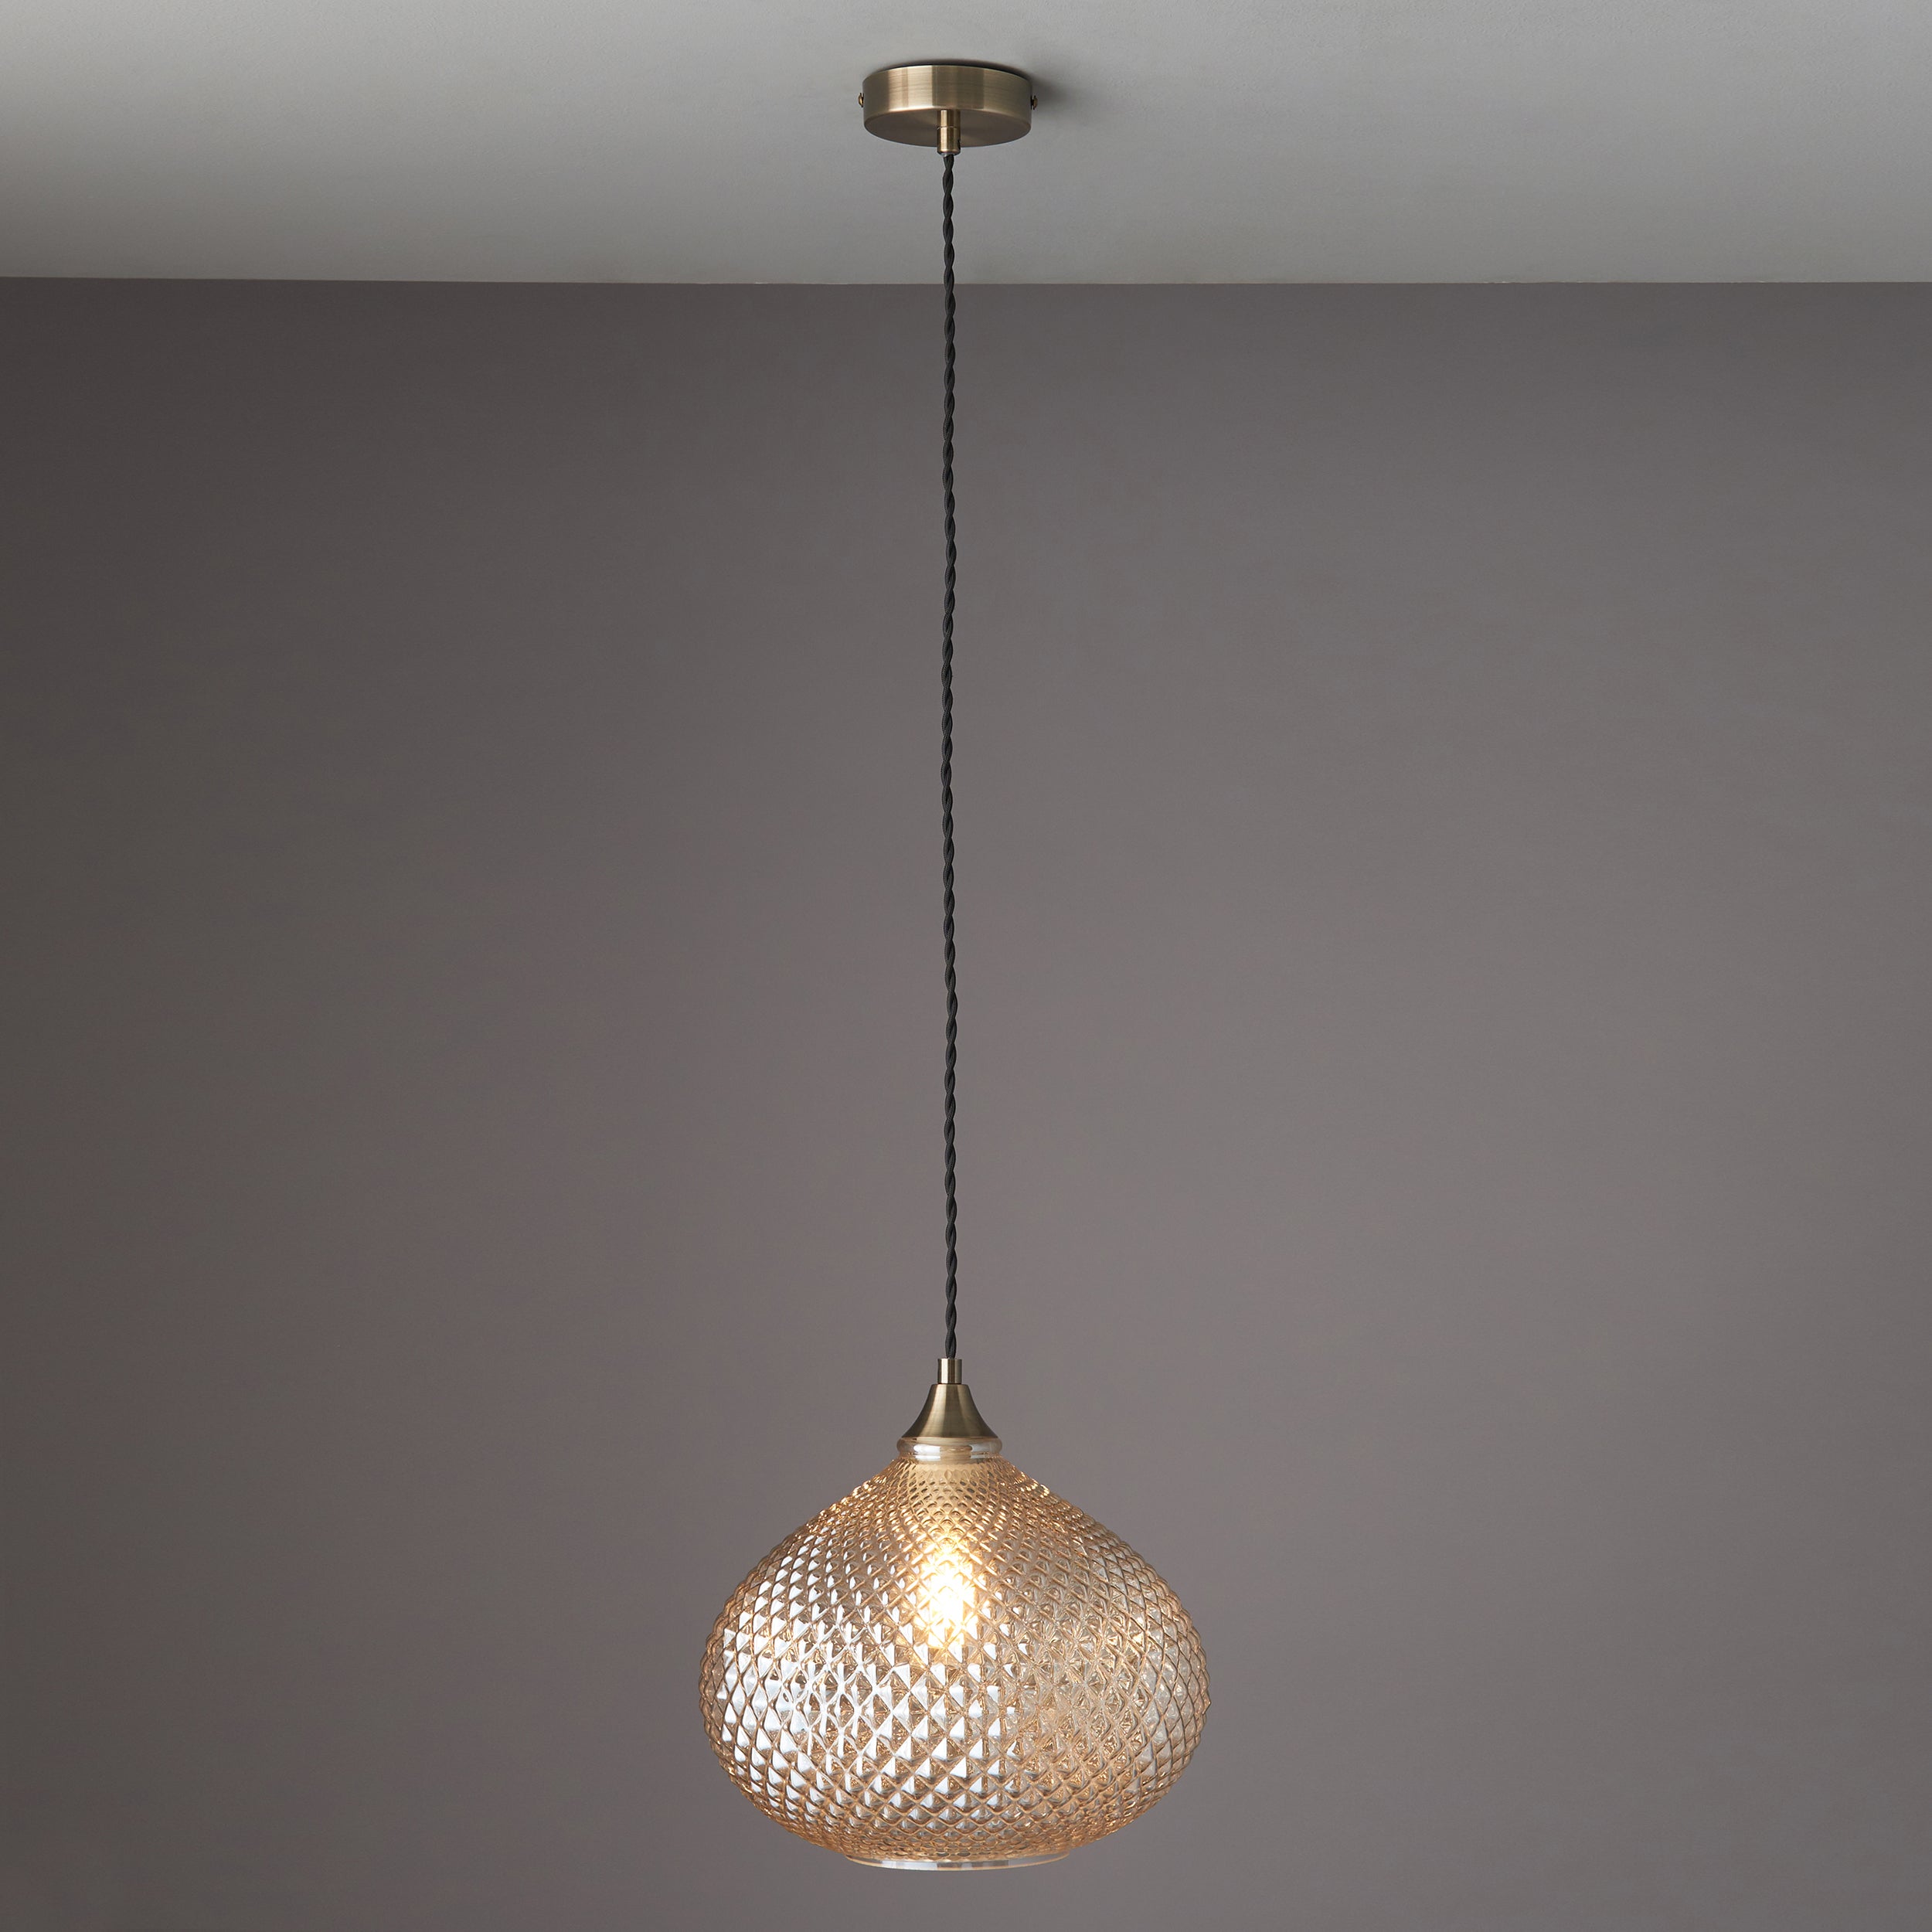 Livia Pendant Light In Antique Brass And Champagne Glass